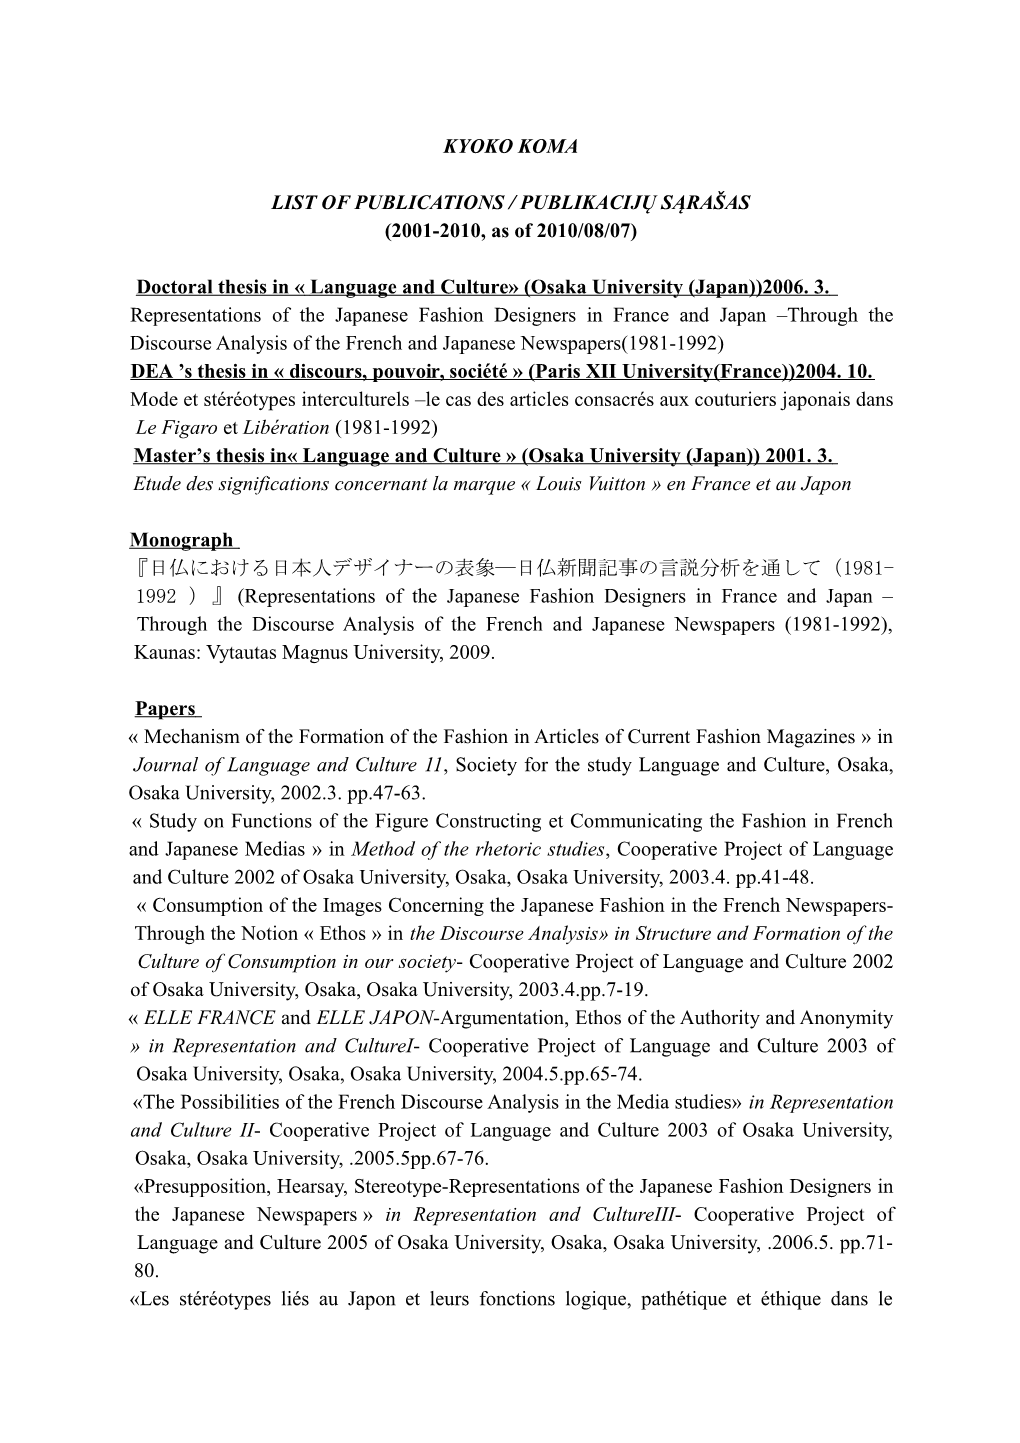 Doctoral Thesis in Language and Culture (Osaka University (Japan))2006. 3